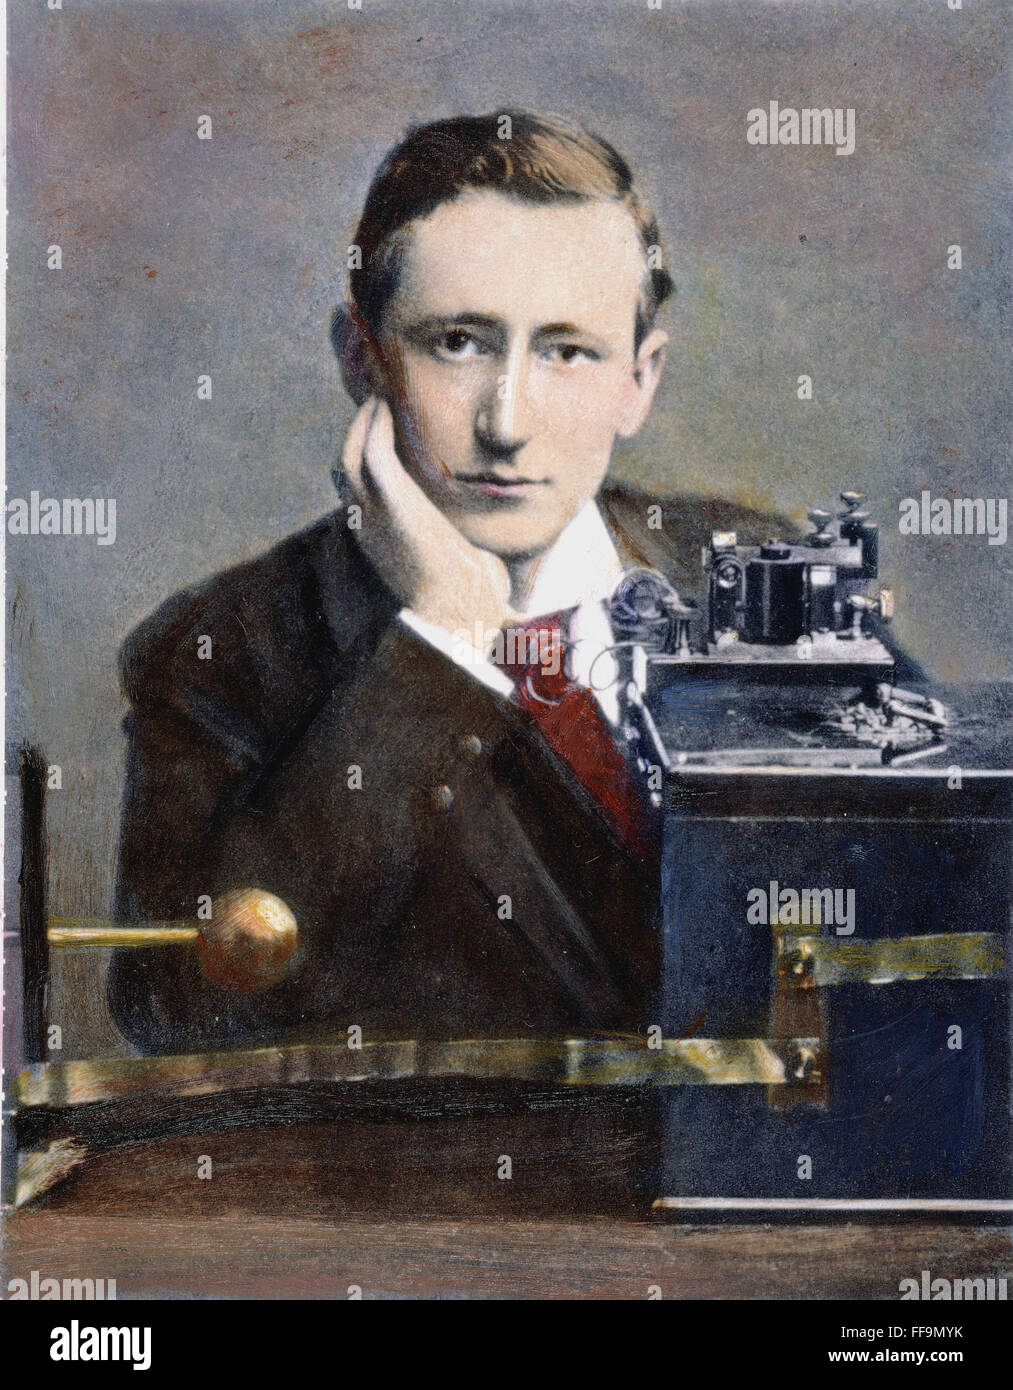 GUGLIELMO MARCONI /n(1874-1937) with his coherer radio receiver: oil over a photograph, 1896. Stock Photo